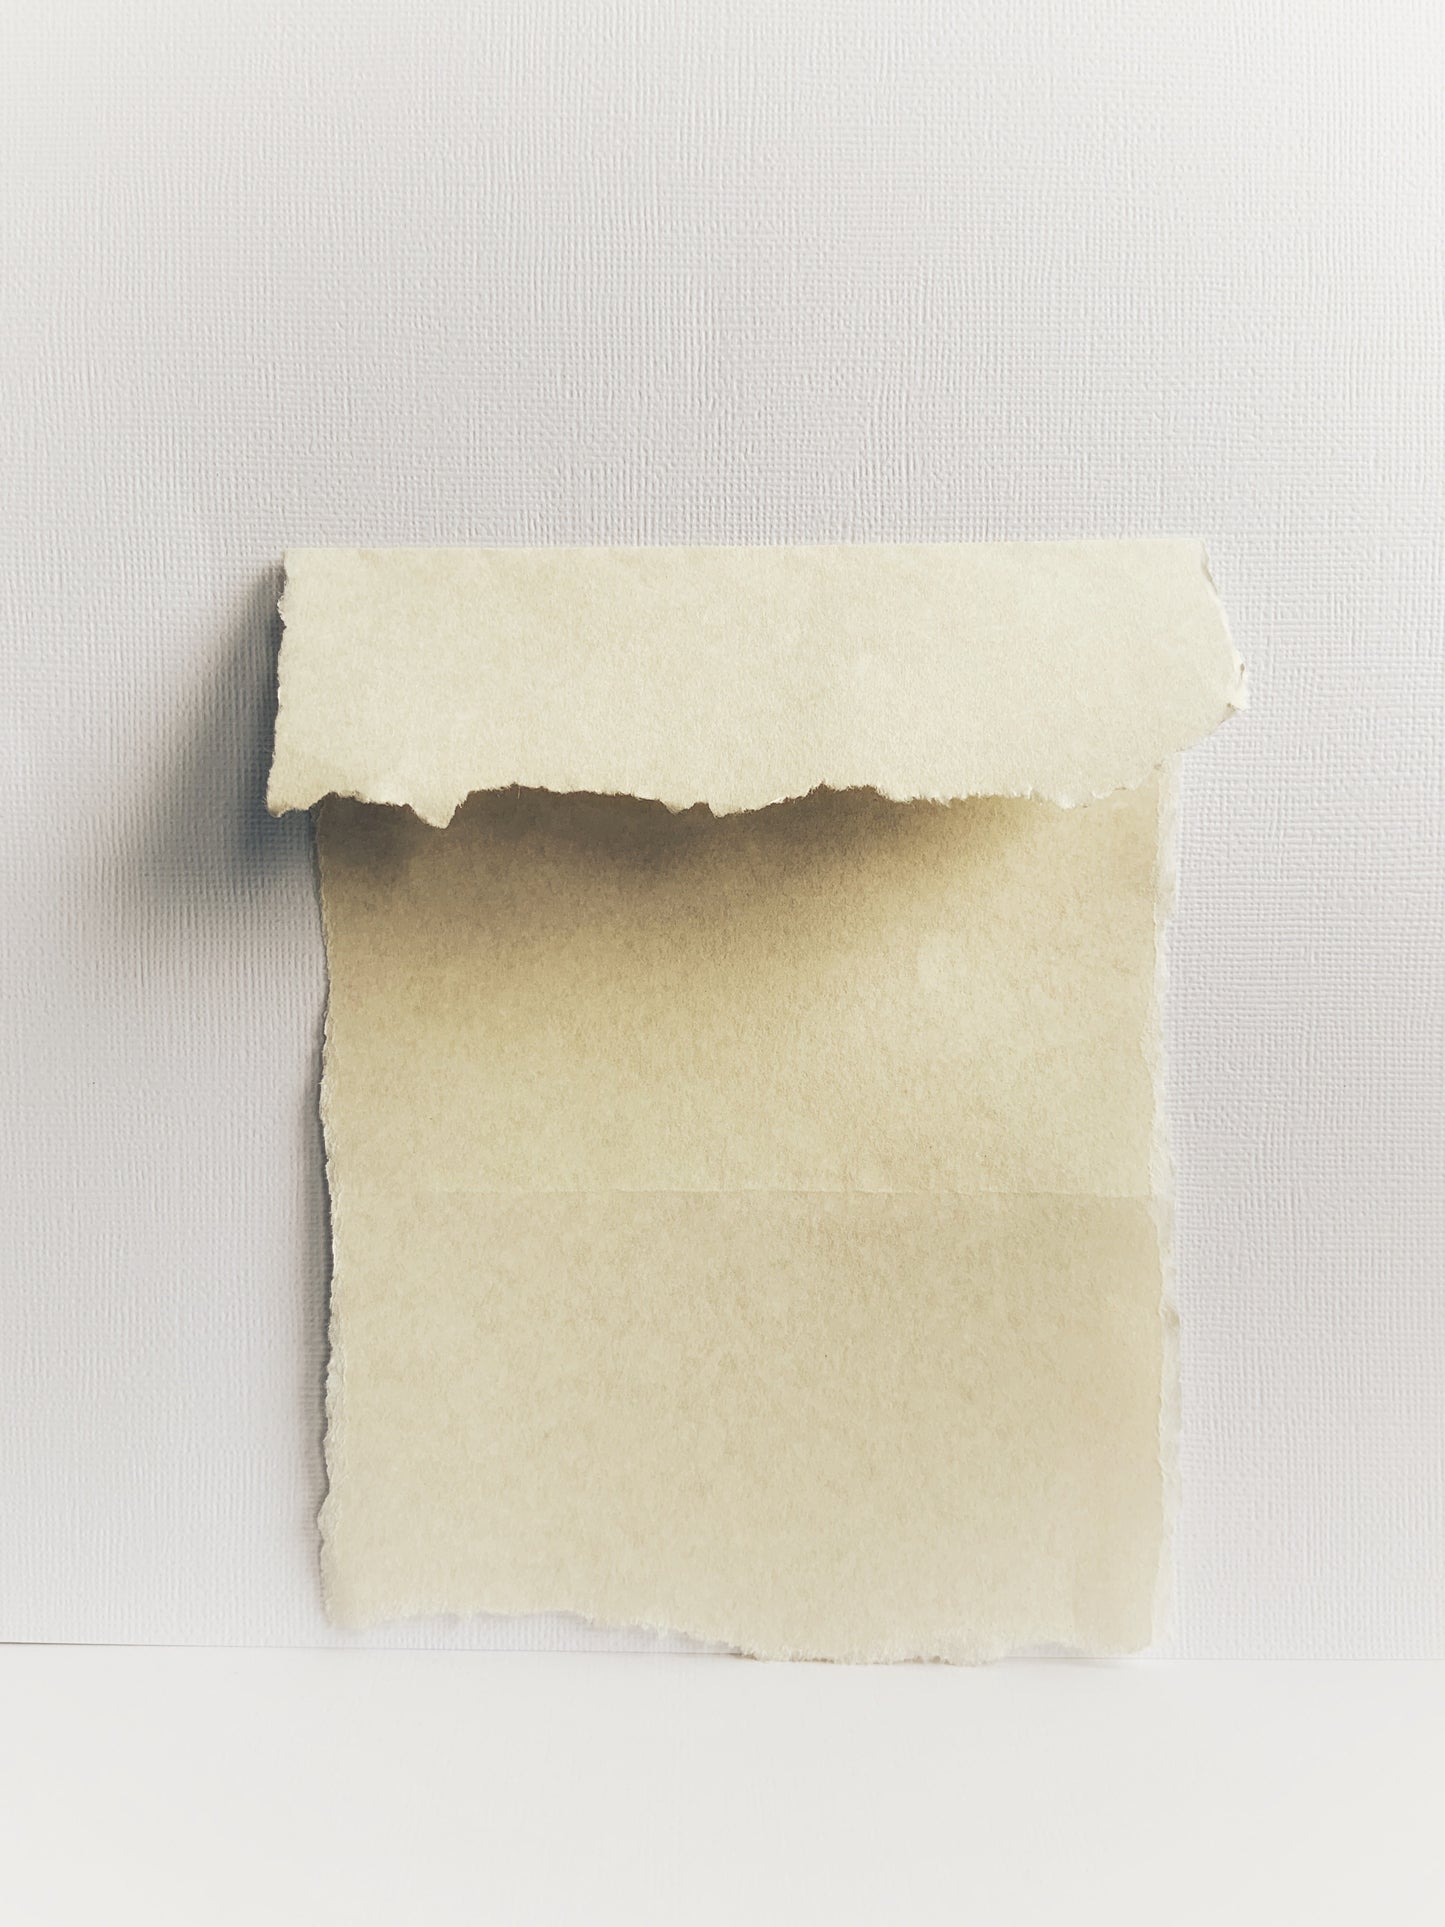 Natural-colored parchment paper with torn edges